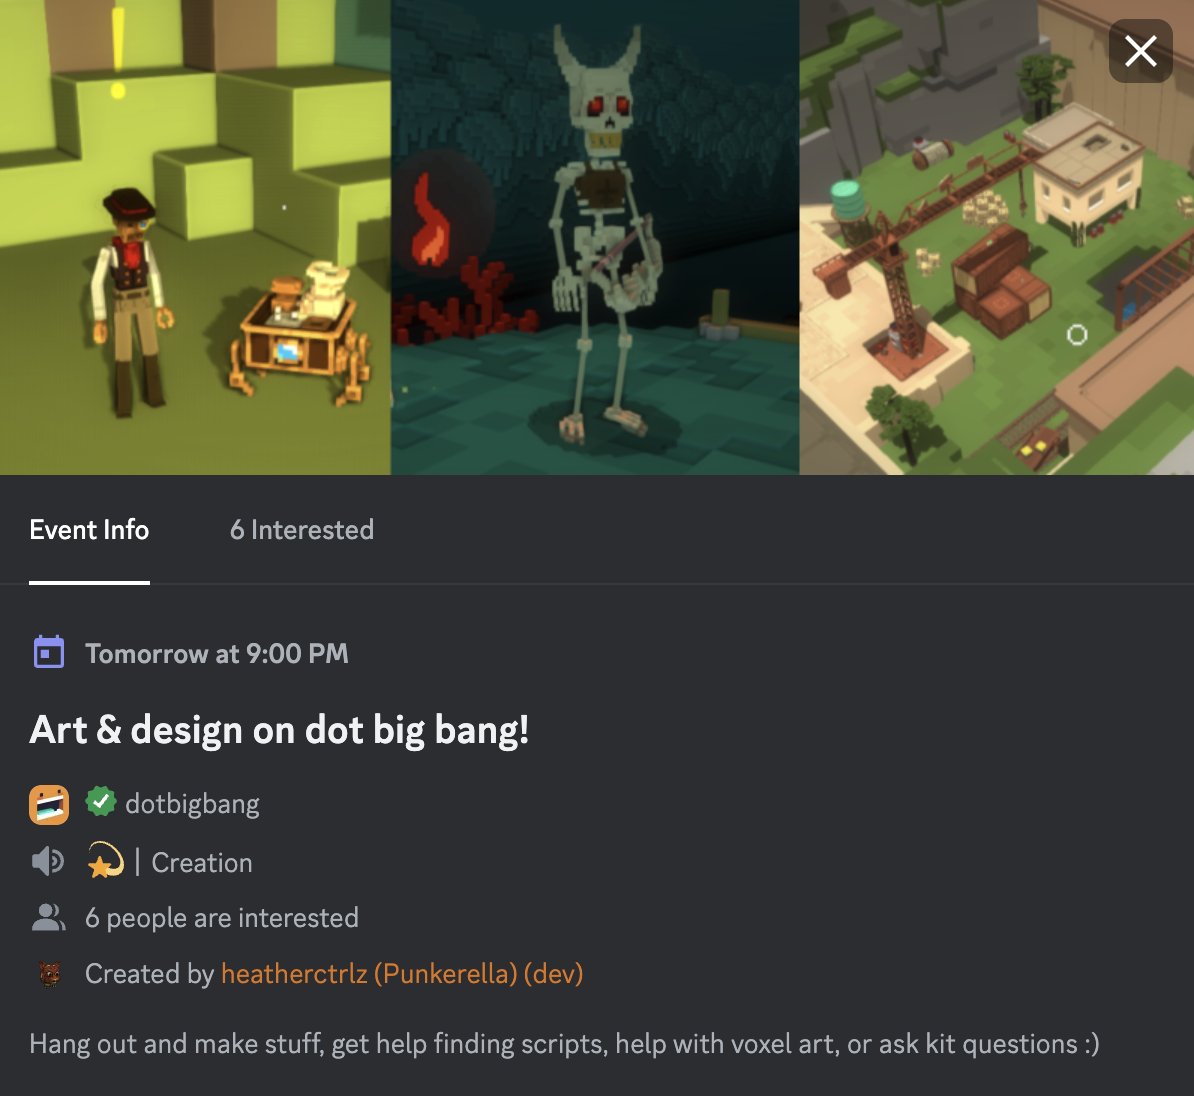 There's an art & design hangout tomorrow on our Discord, with #dotbigbang #gamedev @Chimeric_Arts. Make stuff, chat, ask questions, and get help with whatever you're making! Drop an 'interested' on it here for a notification: 🍿discord.gg/byHCK2uN?event… 🍿